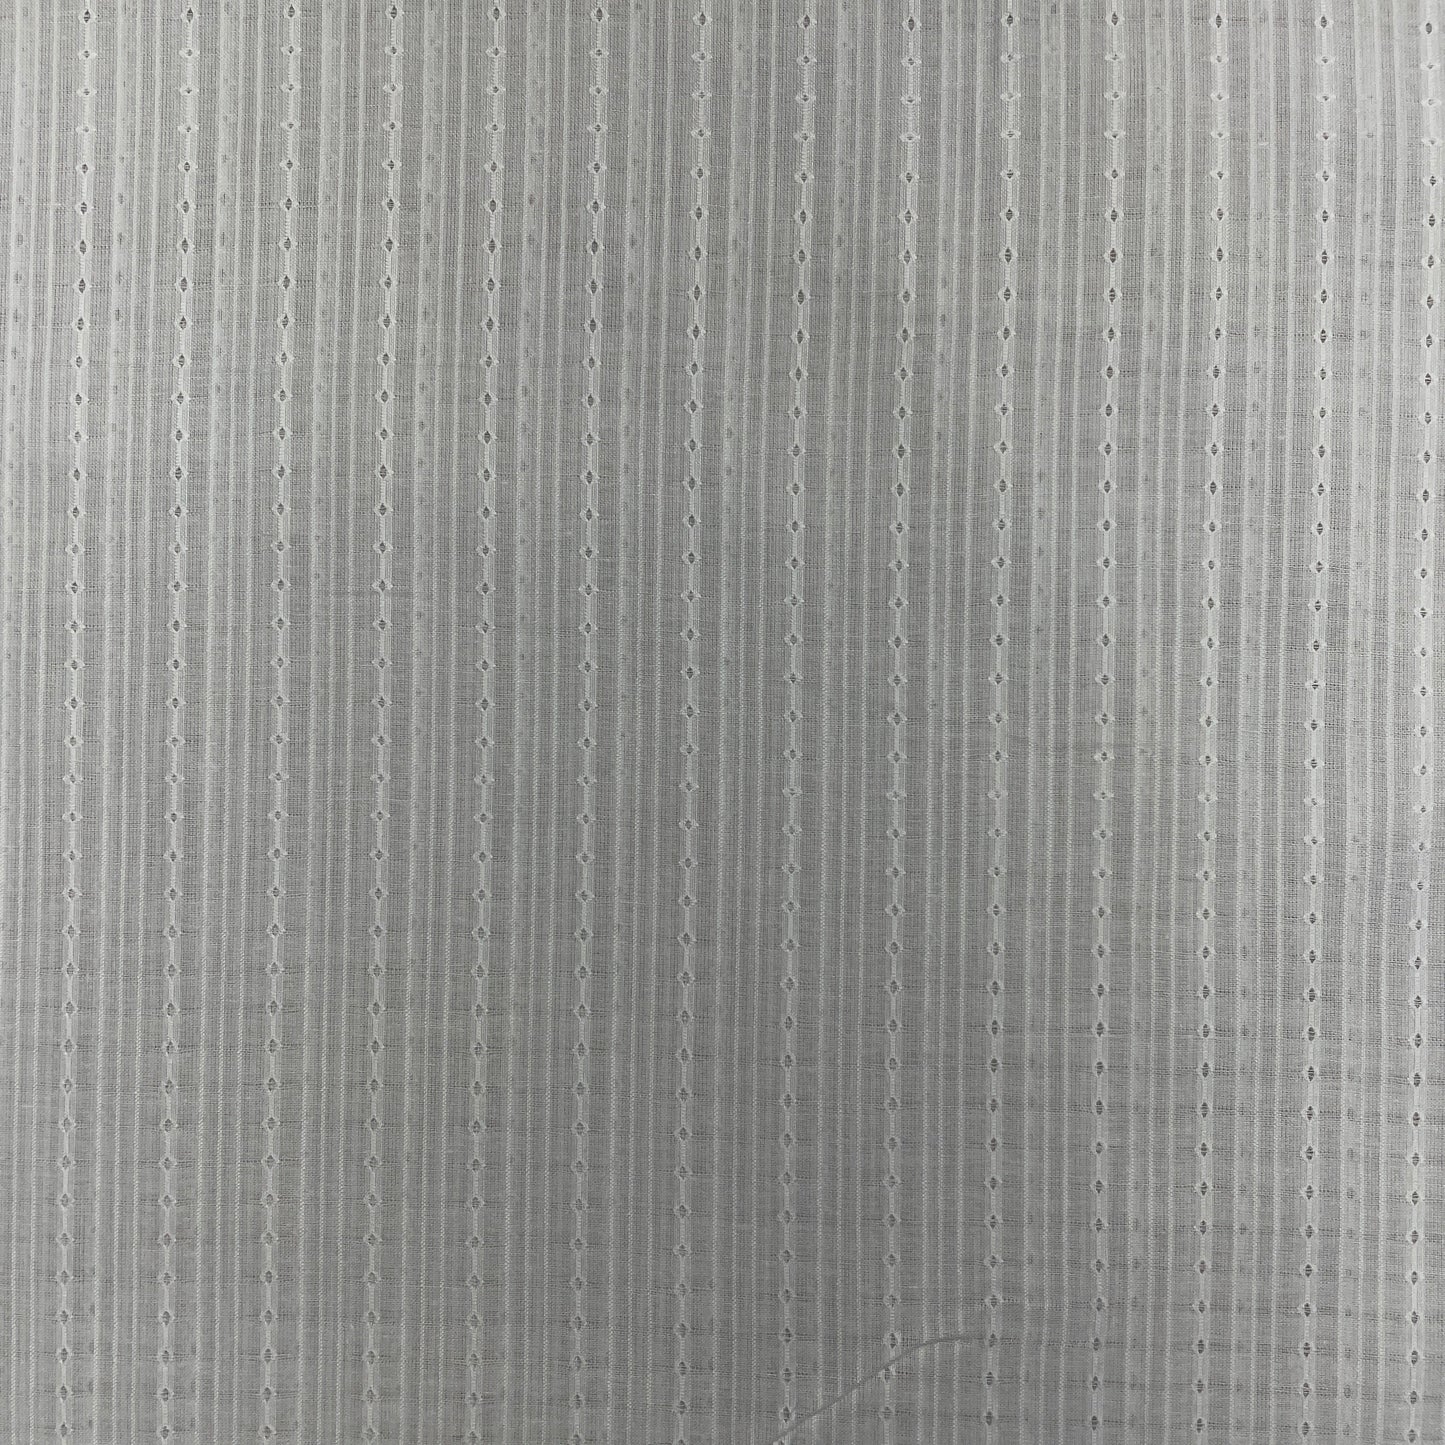 Solid White RFD Dyeable Jacquard Cotton Fabric, Plain Weave 48 Inches Trade UNO 